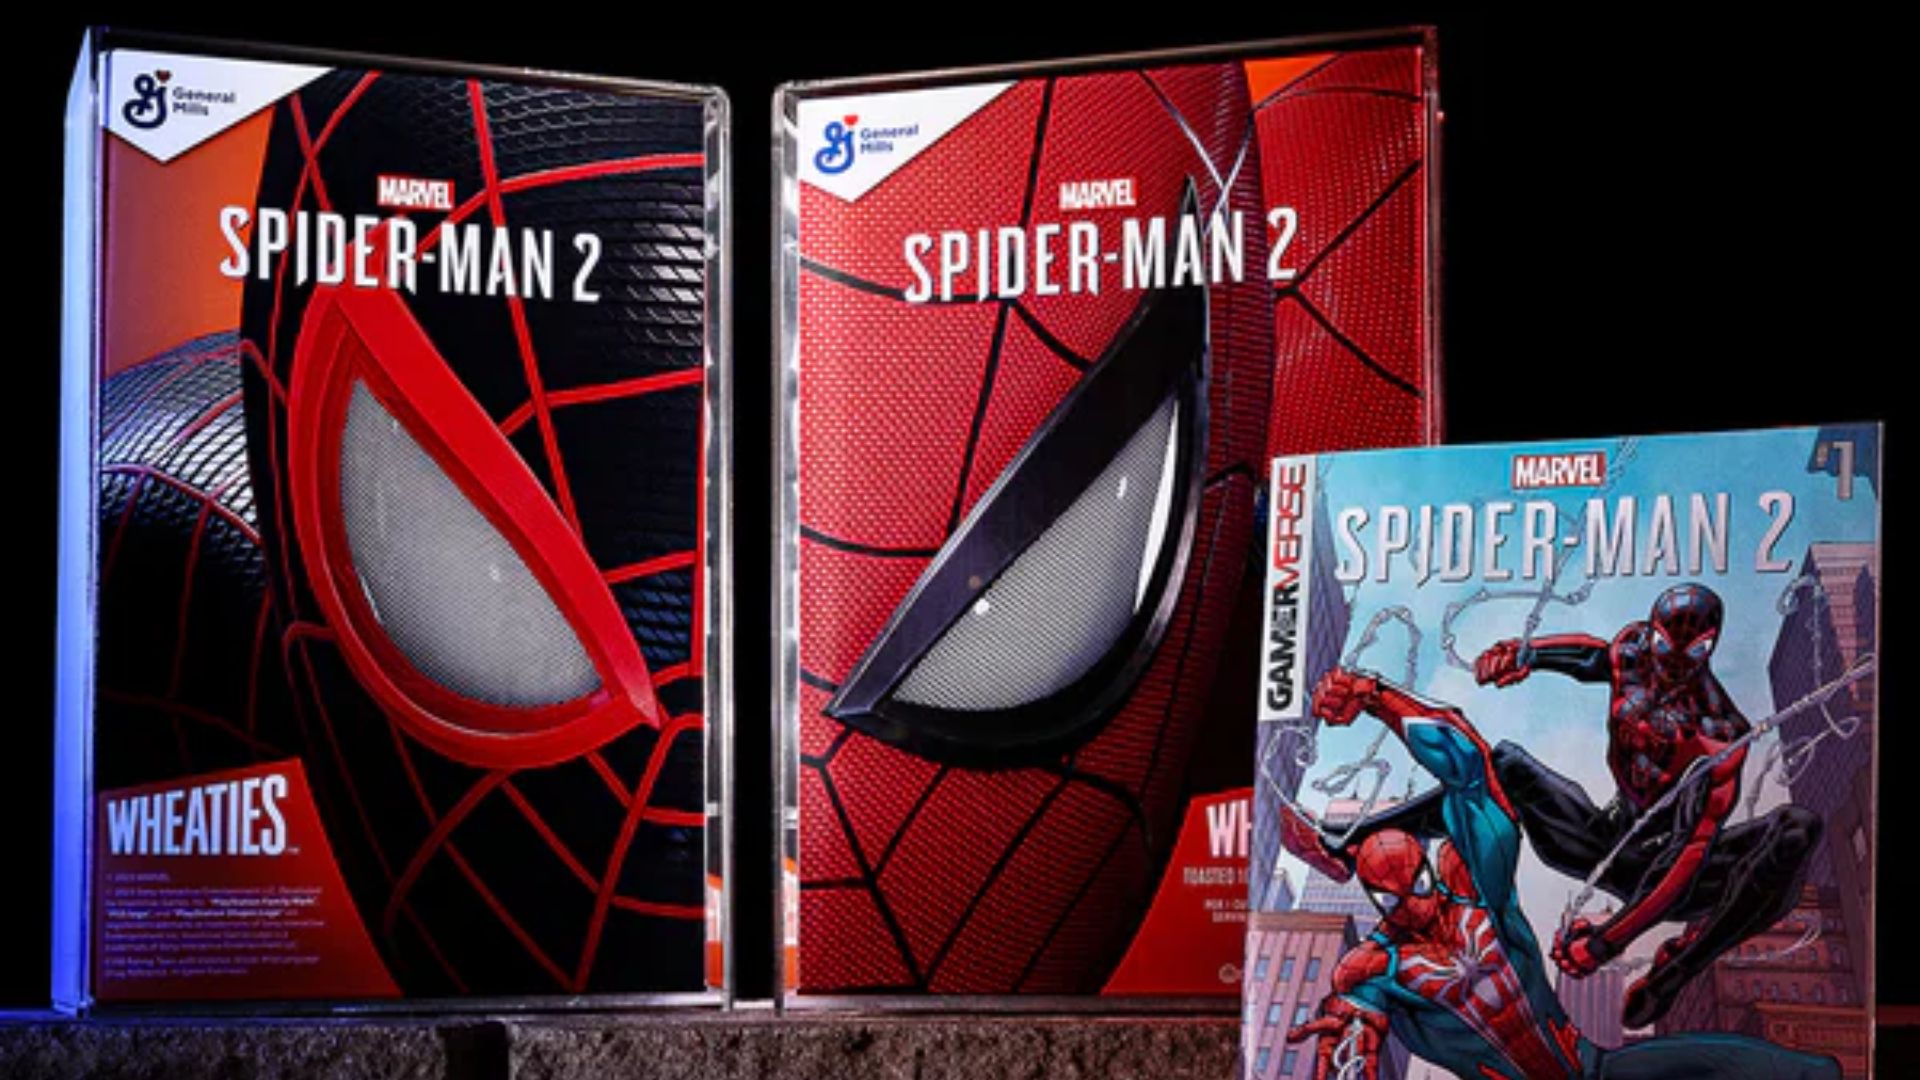 Spider-Man 2 Wheaties cereal boxes with Miles Morales and Peter Parker on the covers, alongside book with the two characters on the front as well